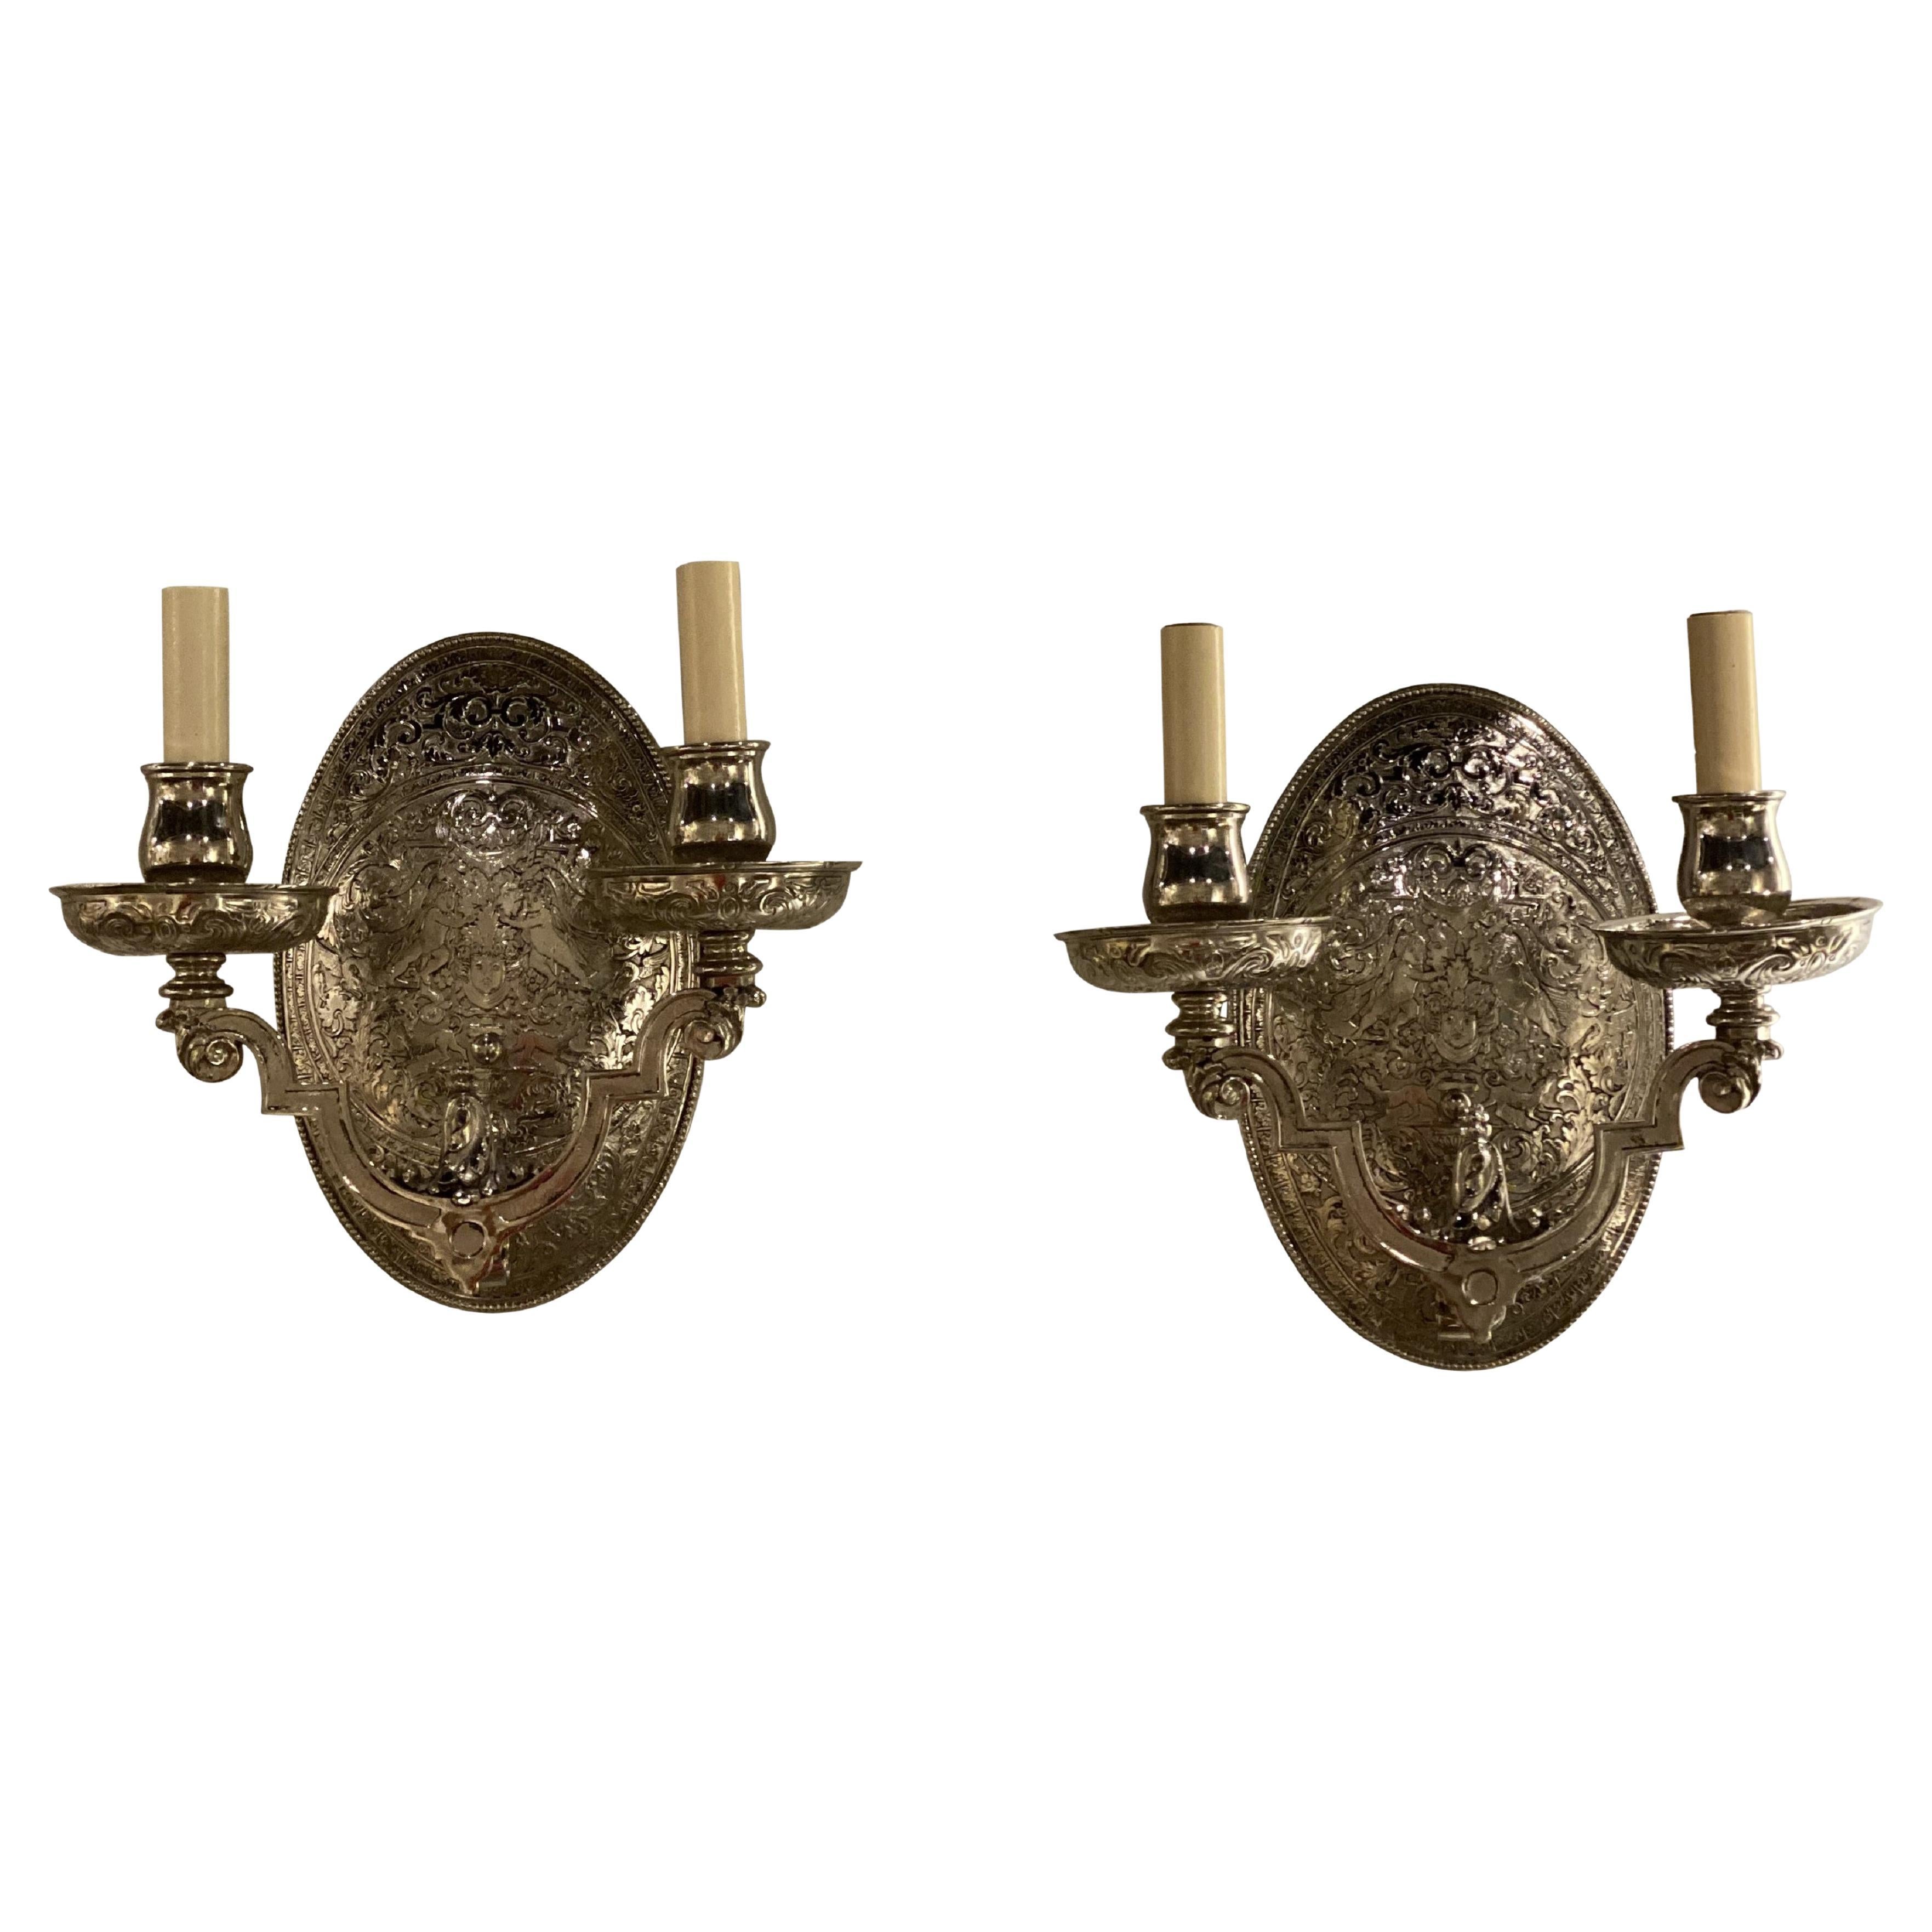 Pair of Caldwell Silver Plated Sconces, Circa 1920s